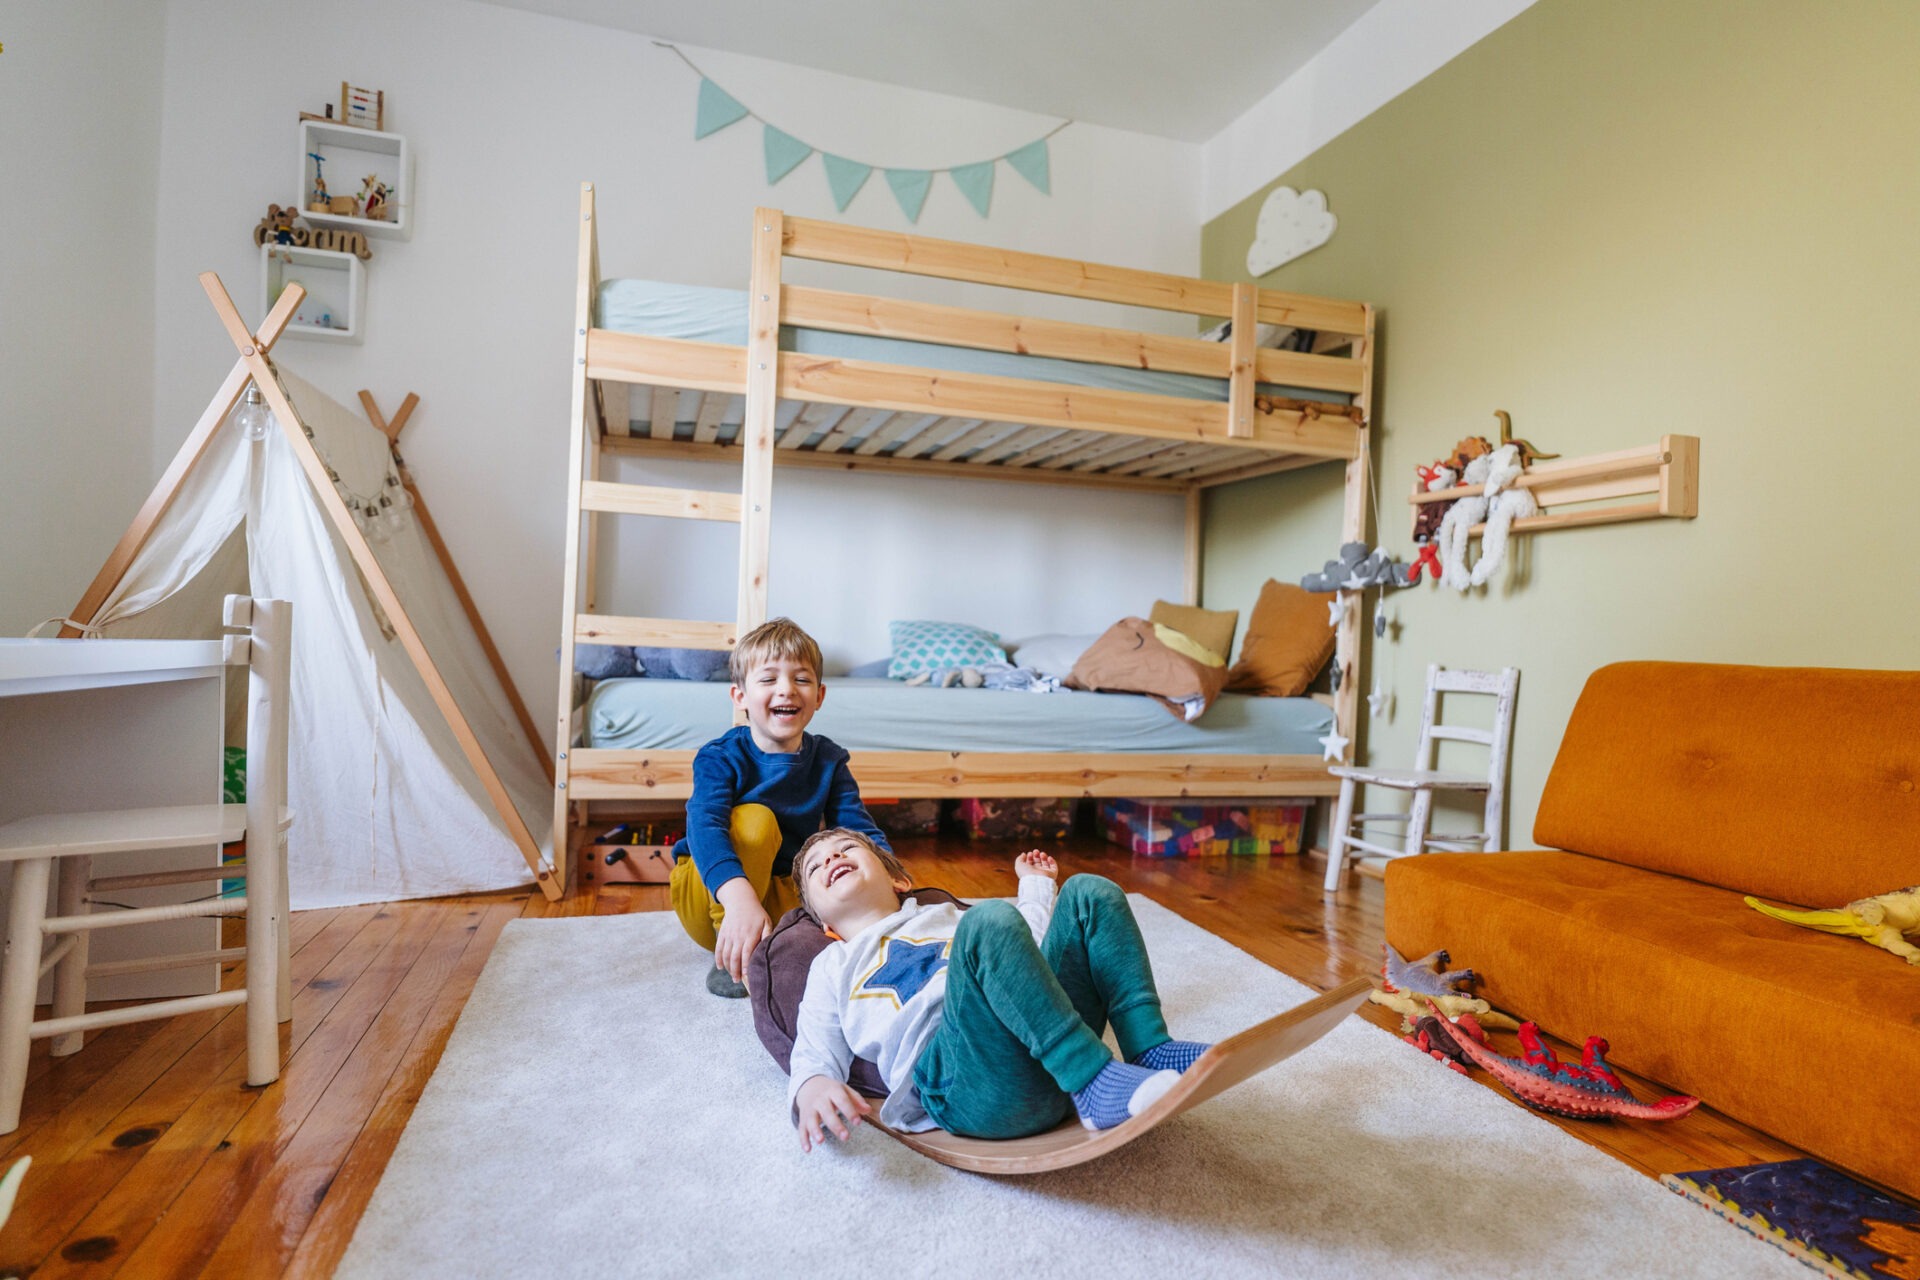 Two smiling children play in a colorful room with a bunk bed, teepee, toys, and a mustard-colored couch. A cozy and playful atmosphere.